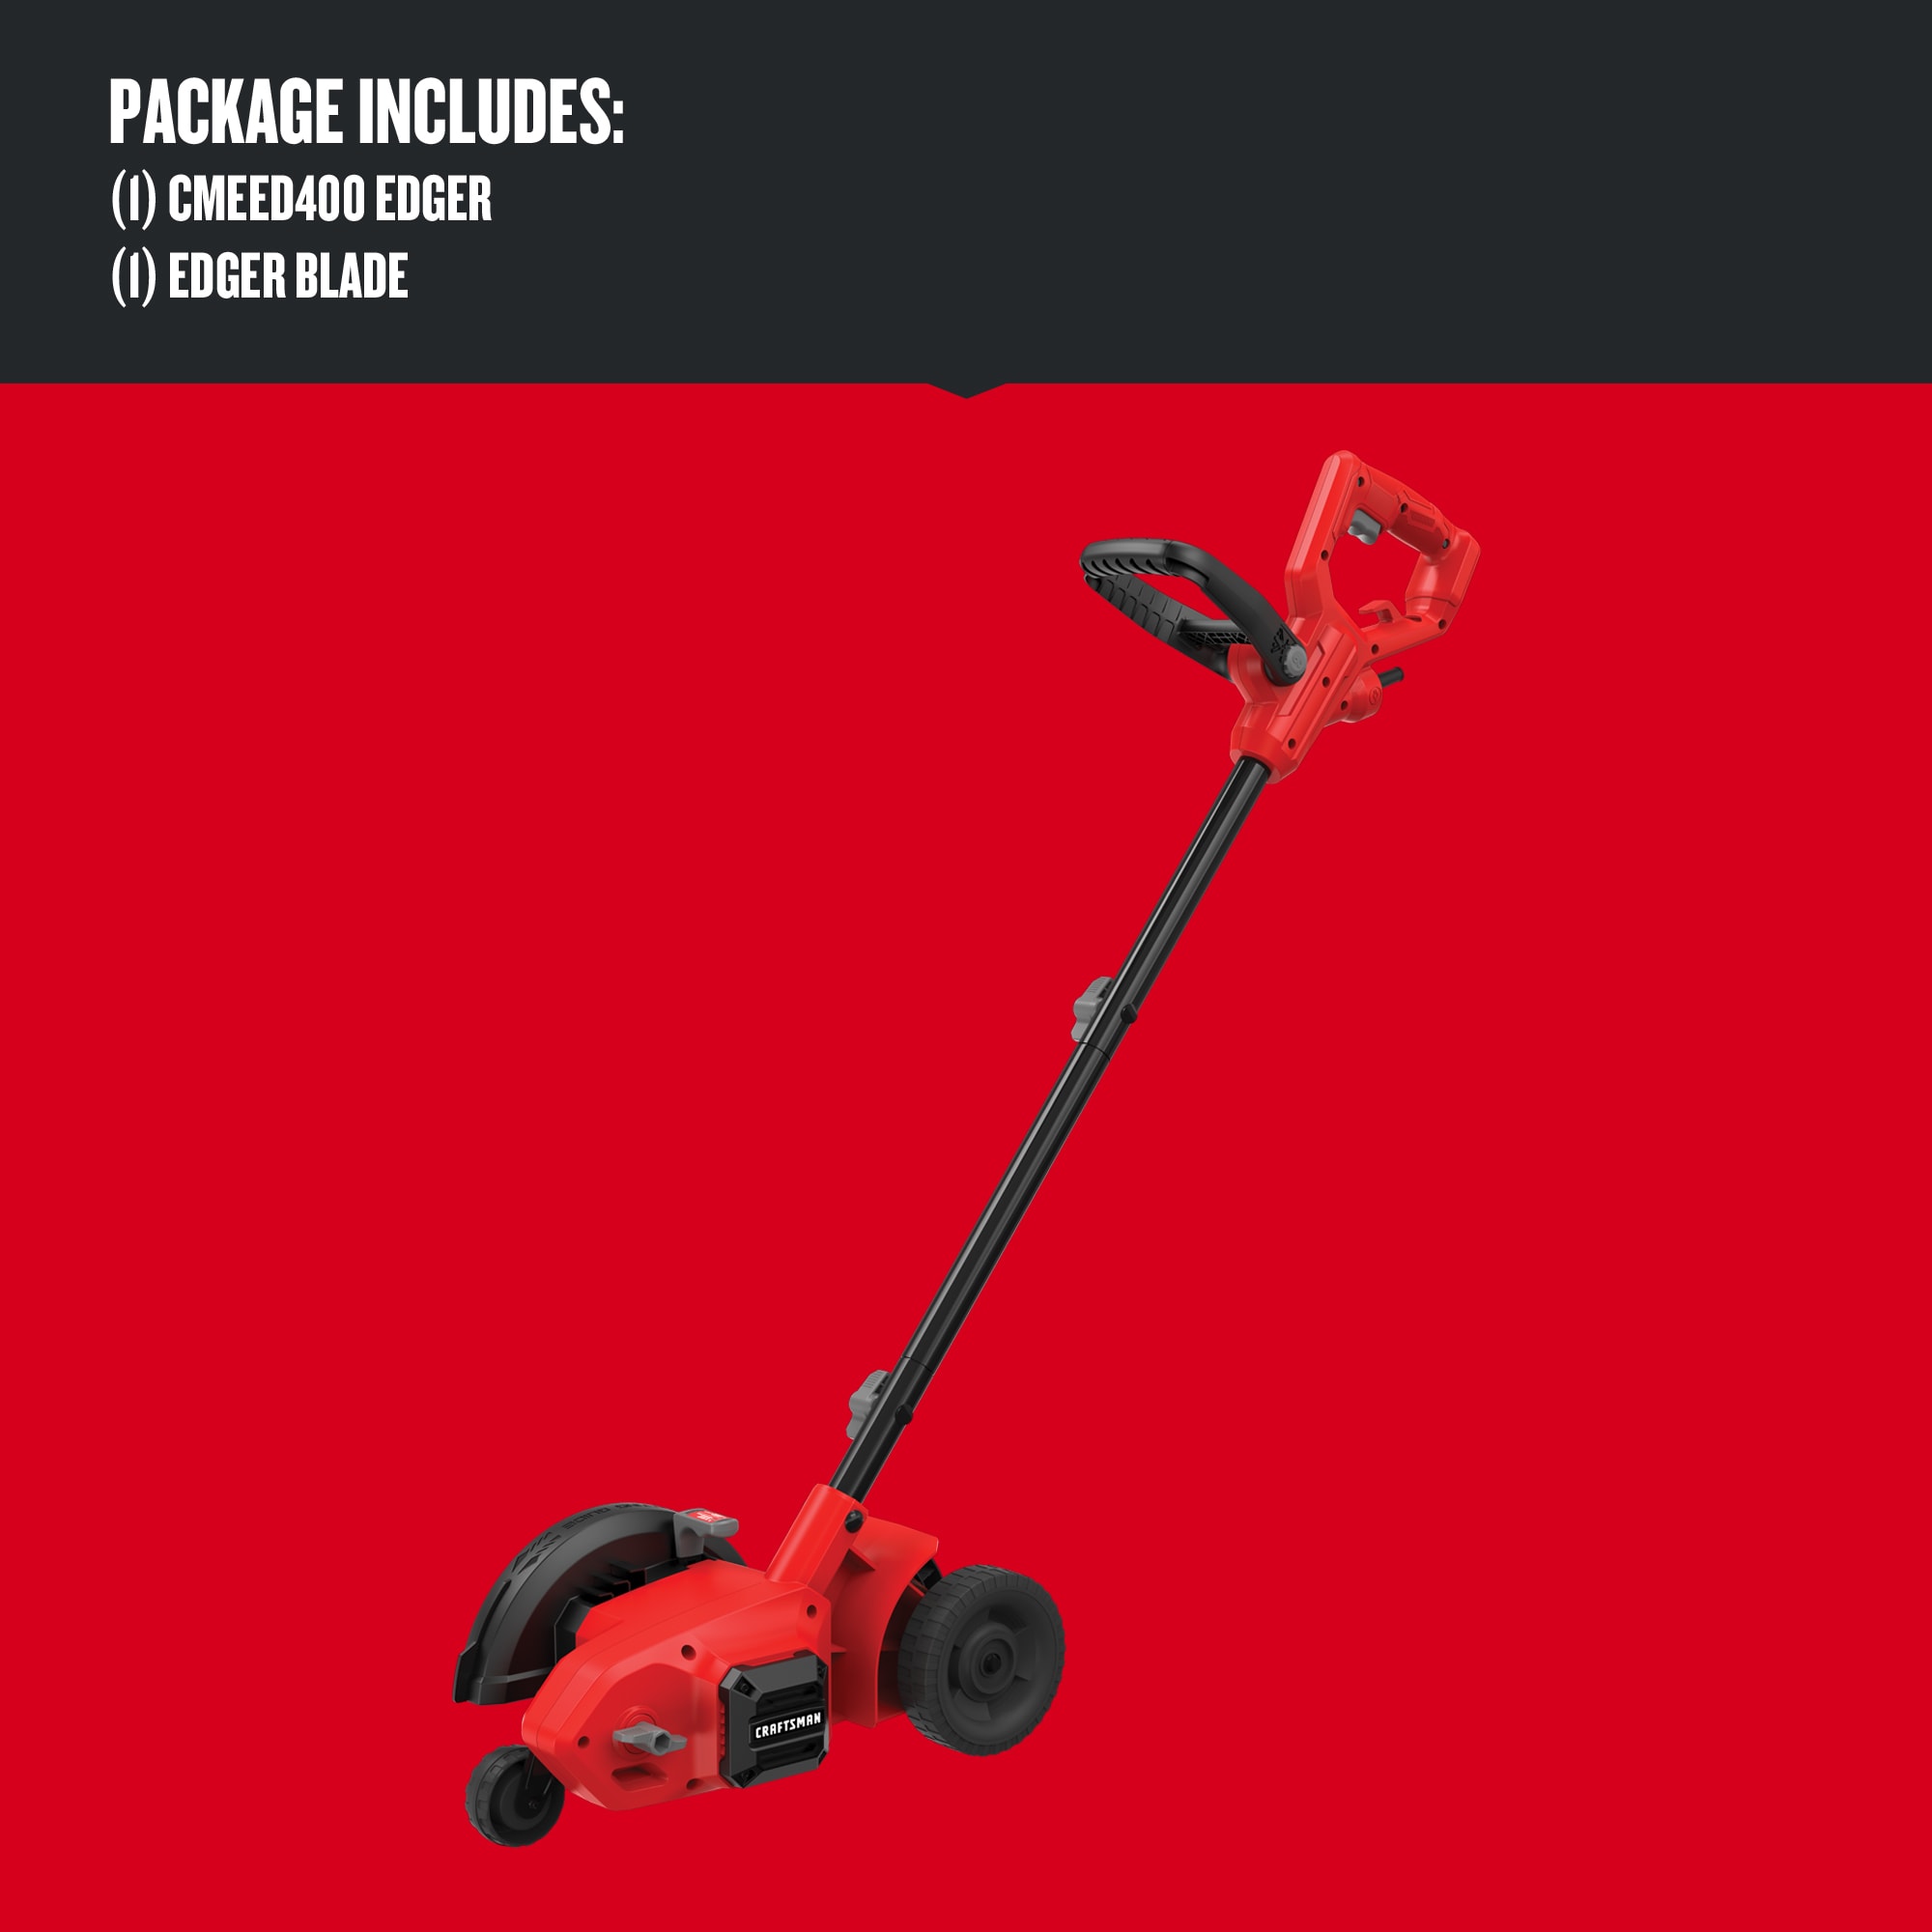 https://discounttoday.net/wp-content/uploads/2022/09/CRAFTSMAN-CMEED400-7.5-in-Push-Walk-Behind-Electric-Lawn-Edger12.jpg